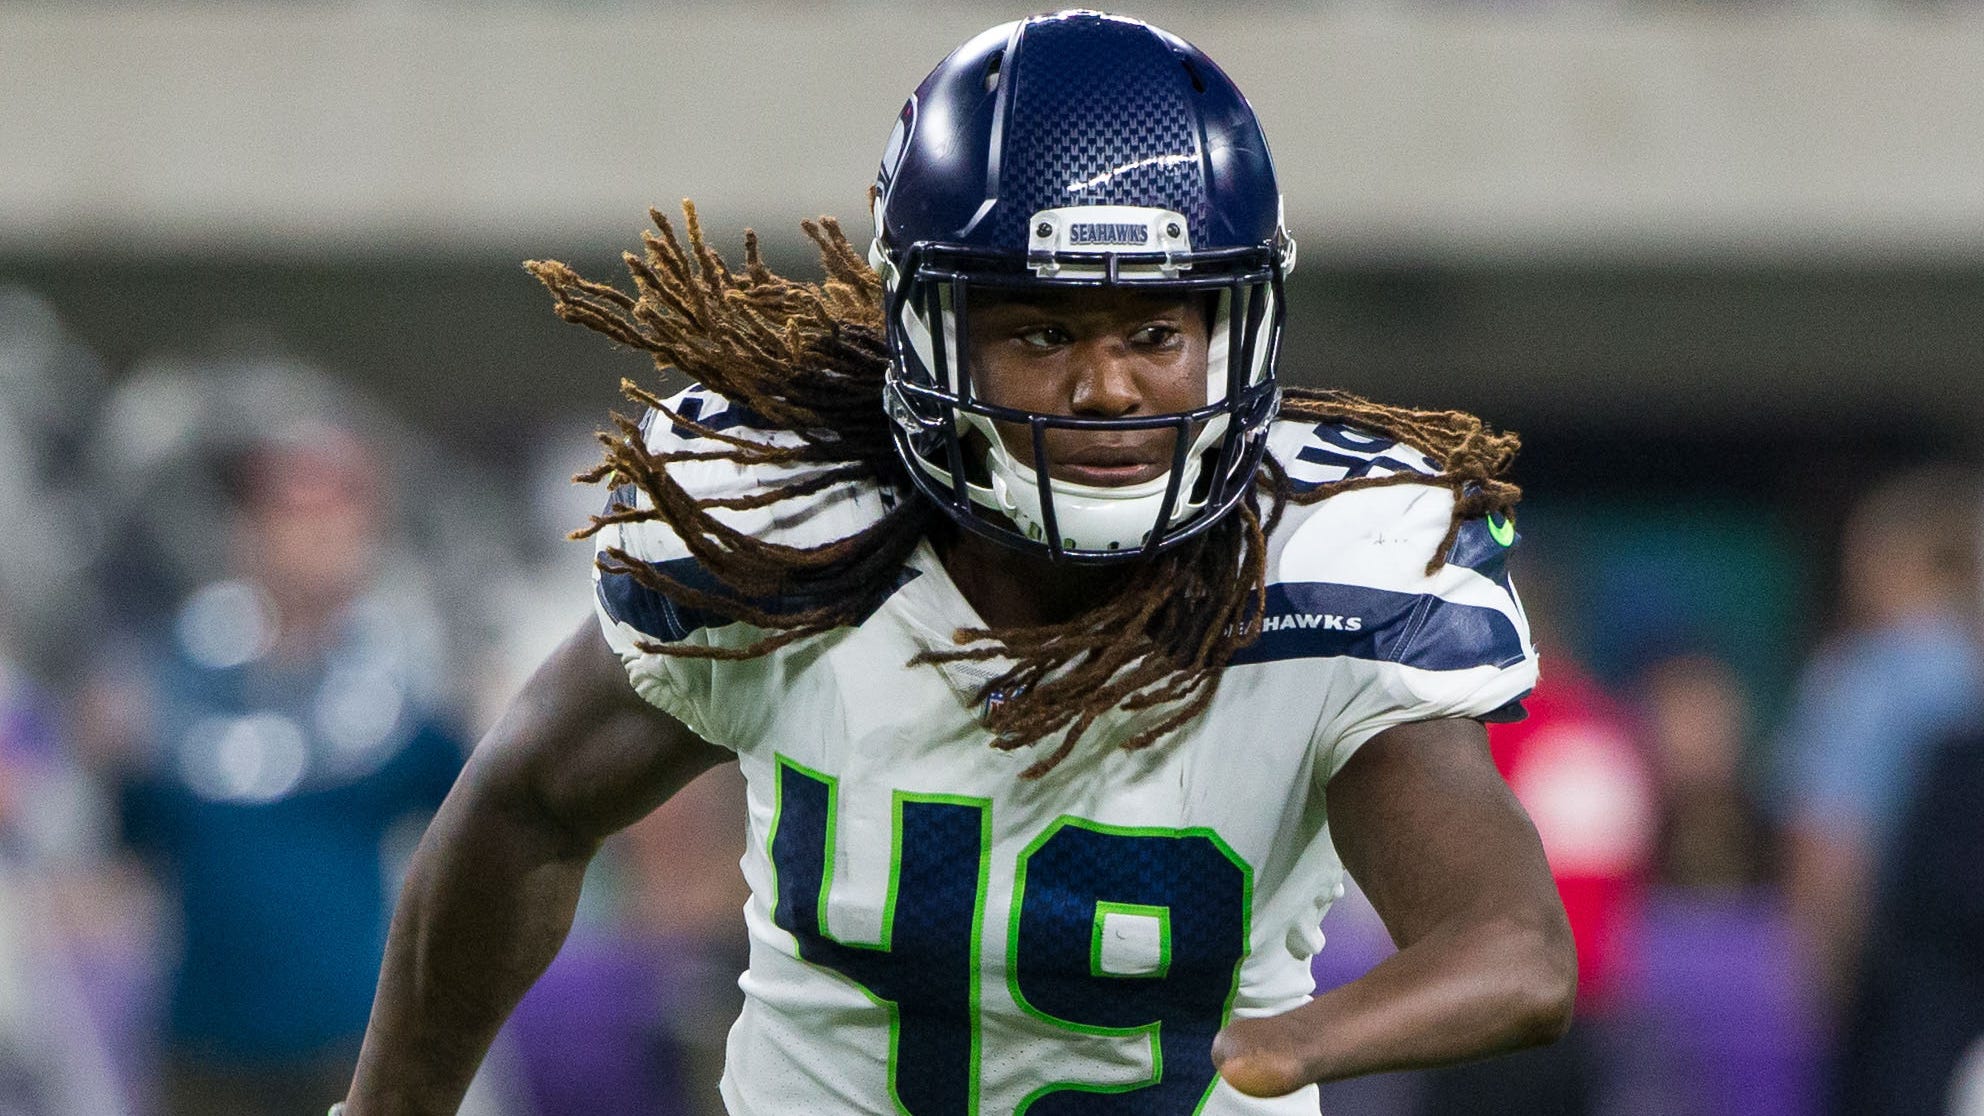 Seahawks Shaquem Griffin One Handed Lb To Get First Start